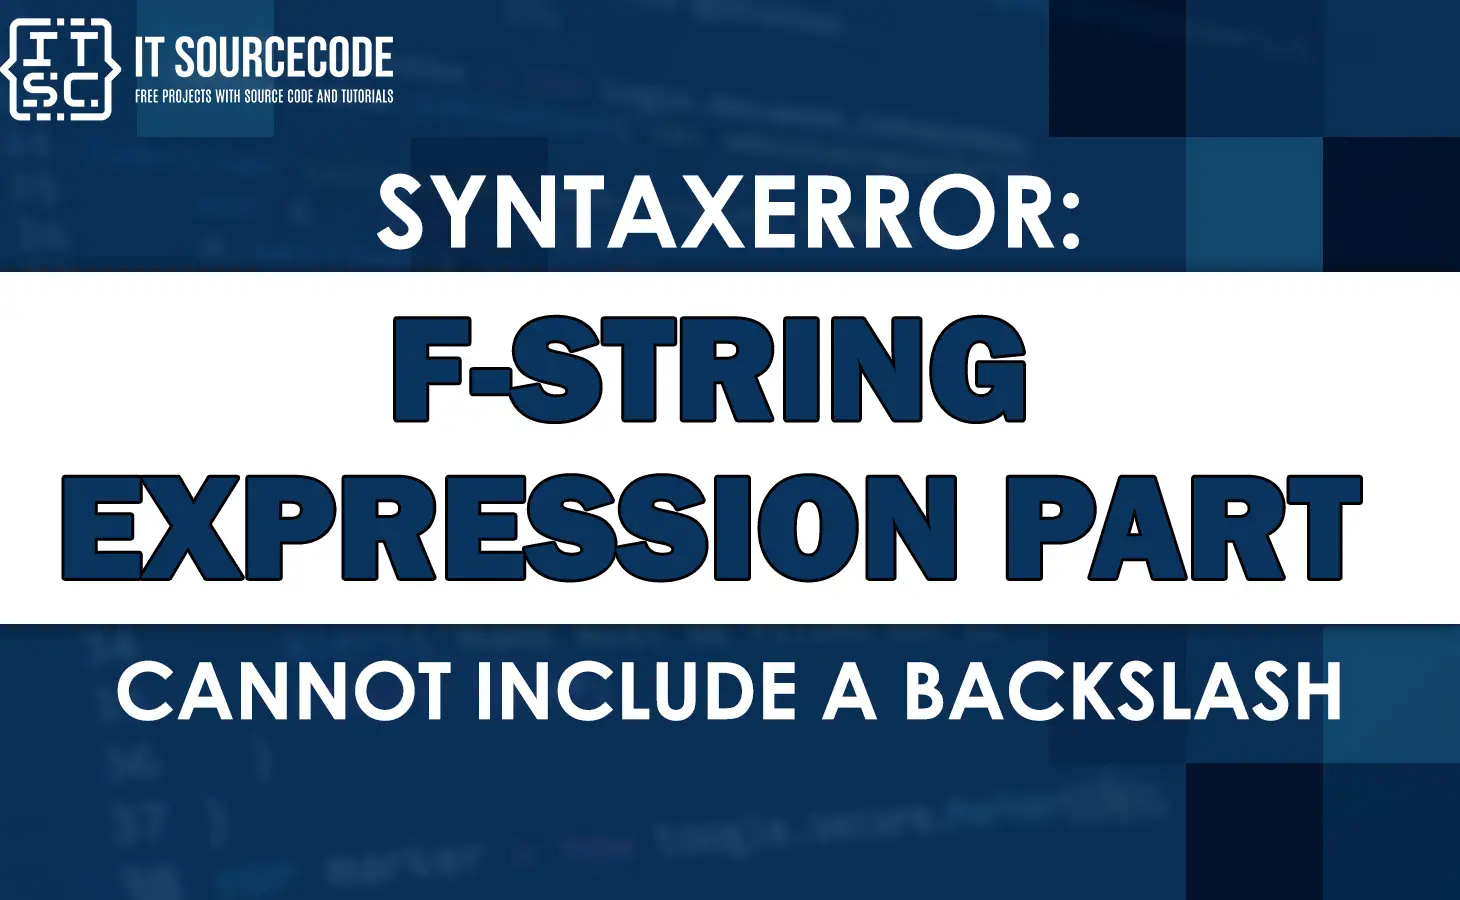 Syntaxerror: f-string expression part cannot include a backslash